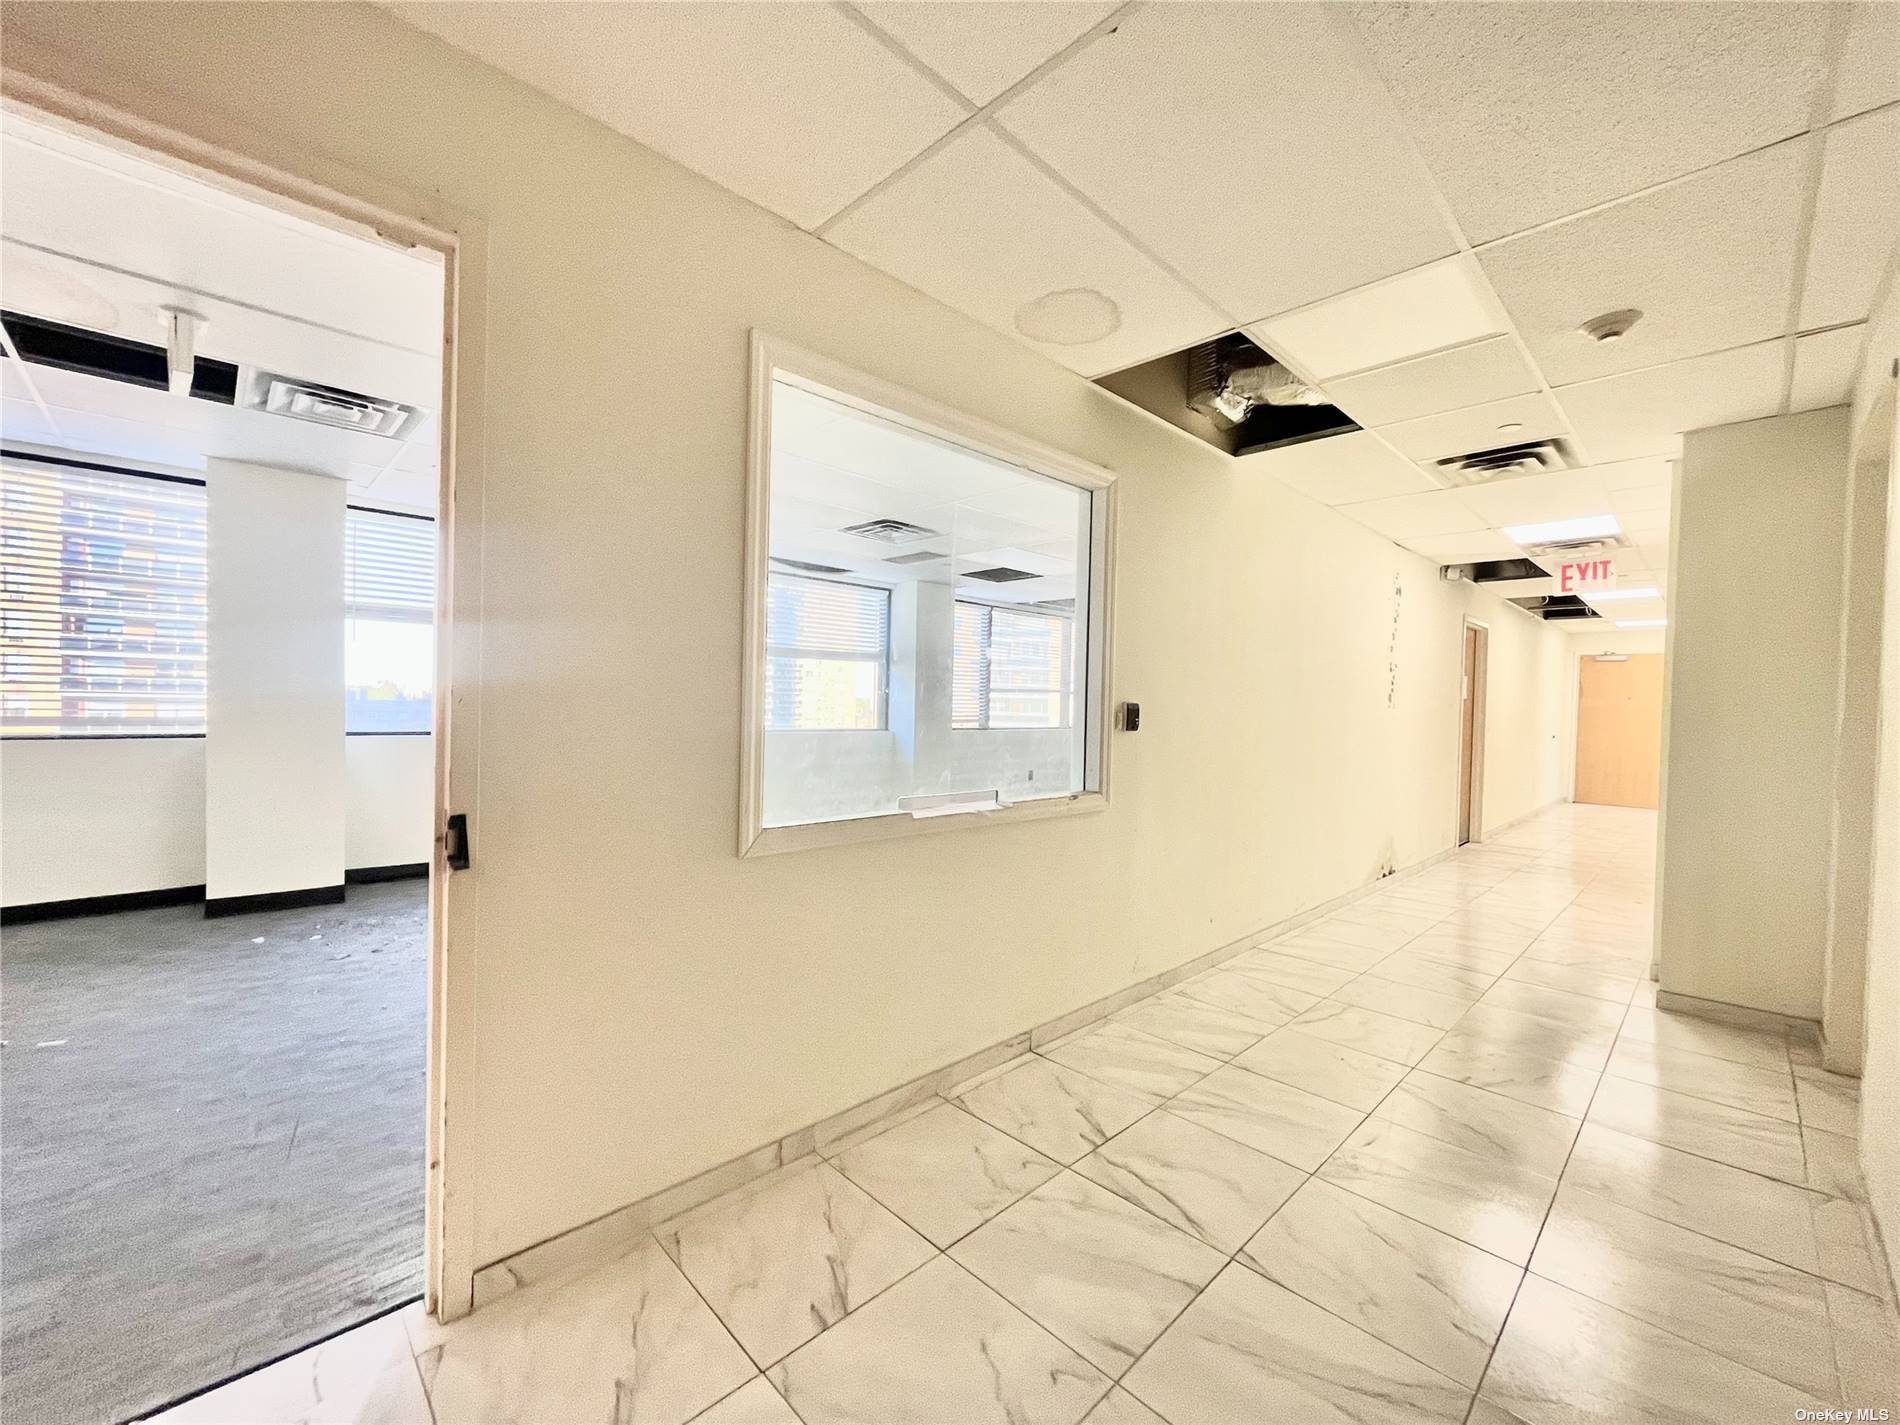 Welcome to this spacious 8, 000 sq ft commercial space.